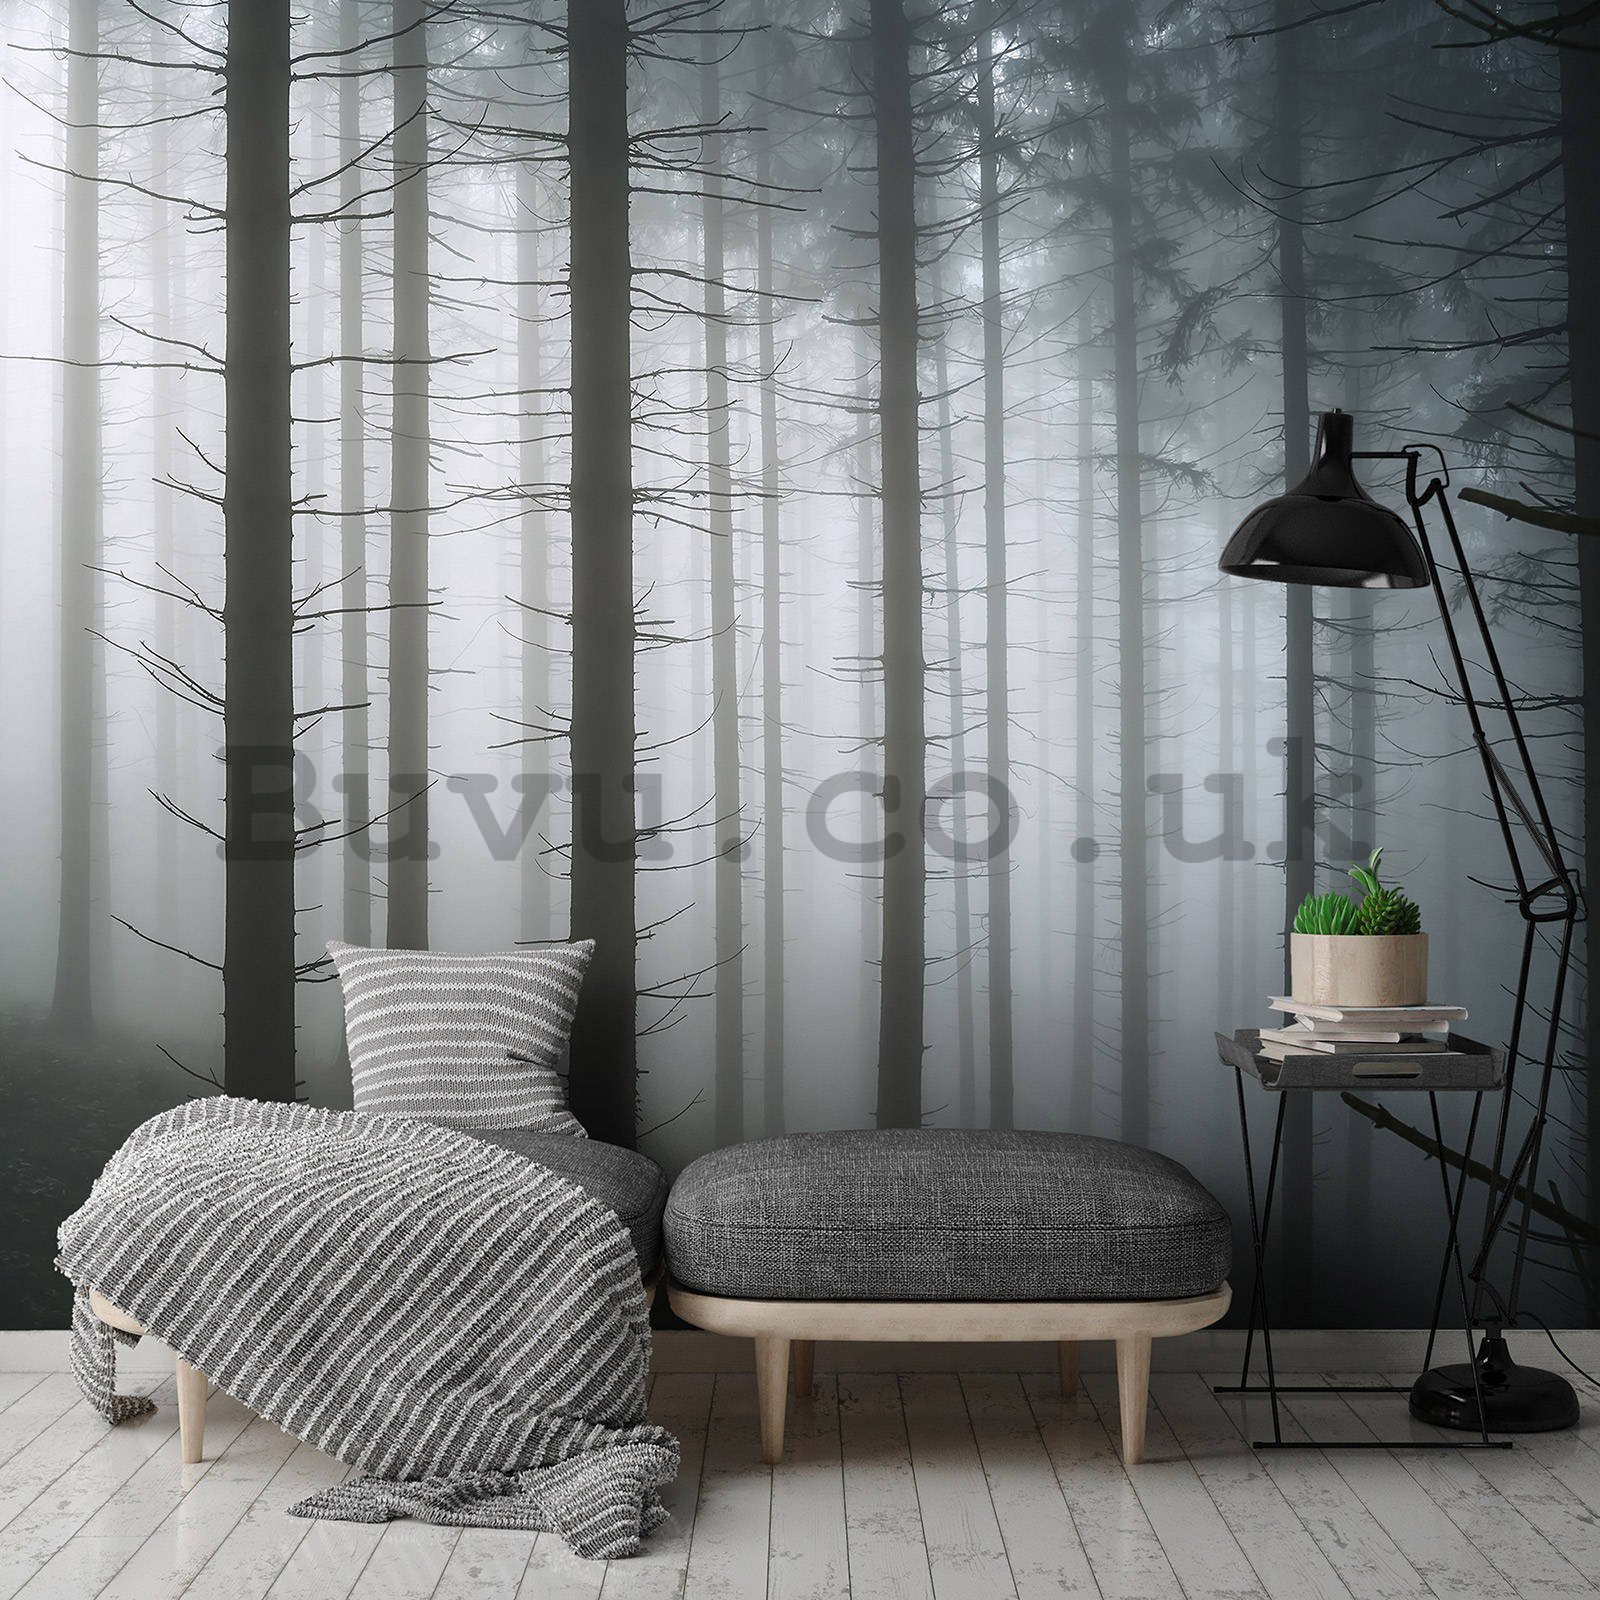 Wall mural vlies: Haunted Forest (1) - 254x184 cm